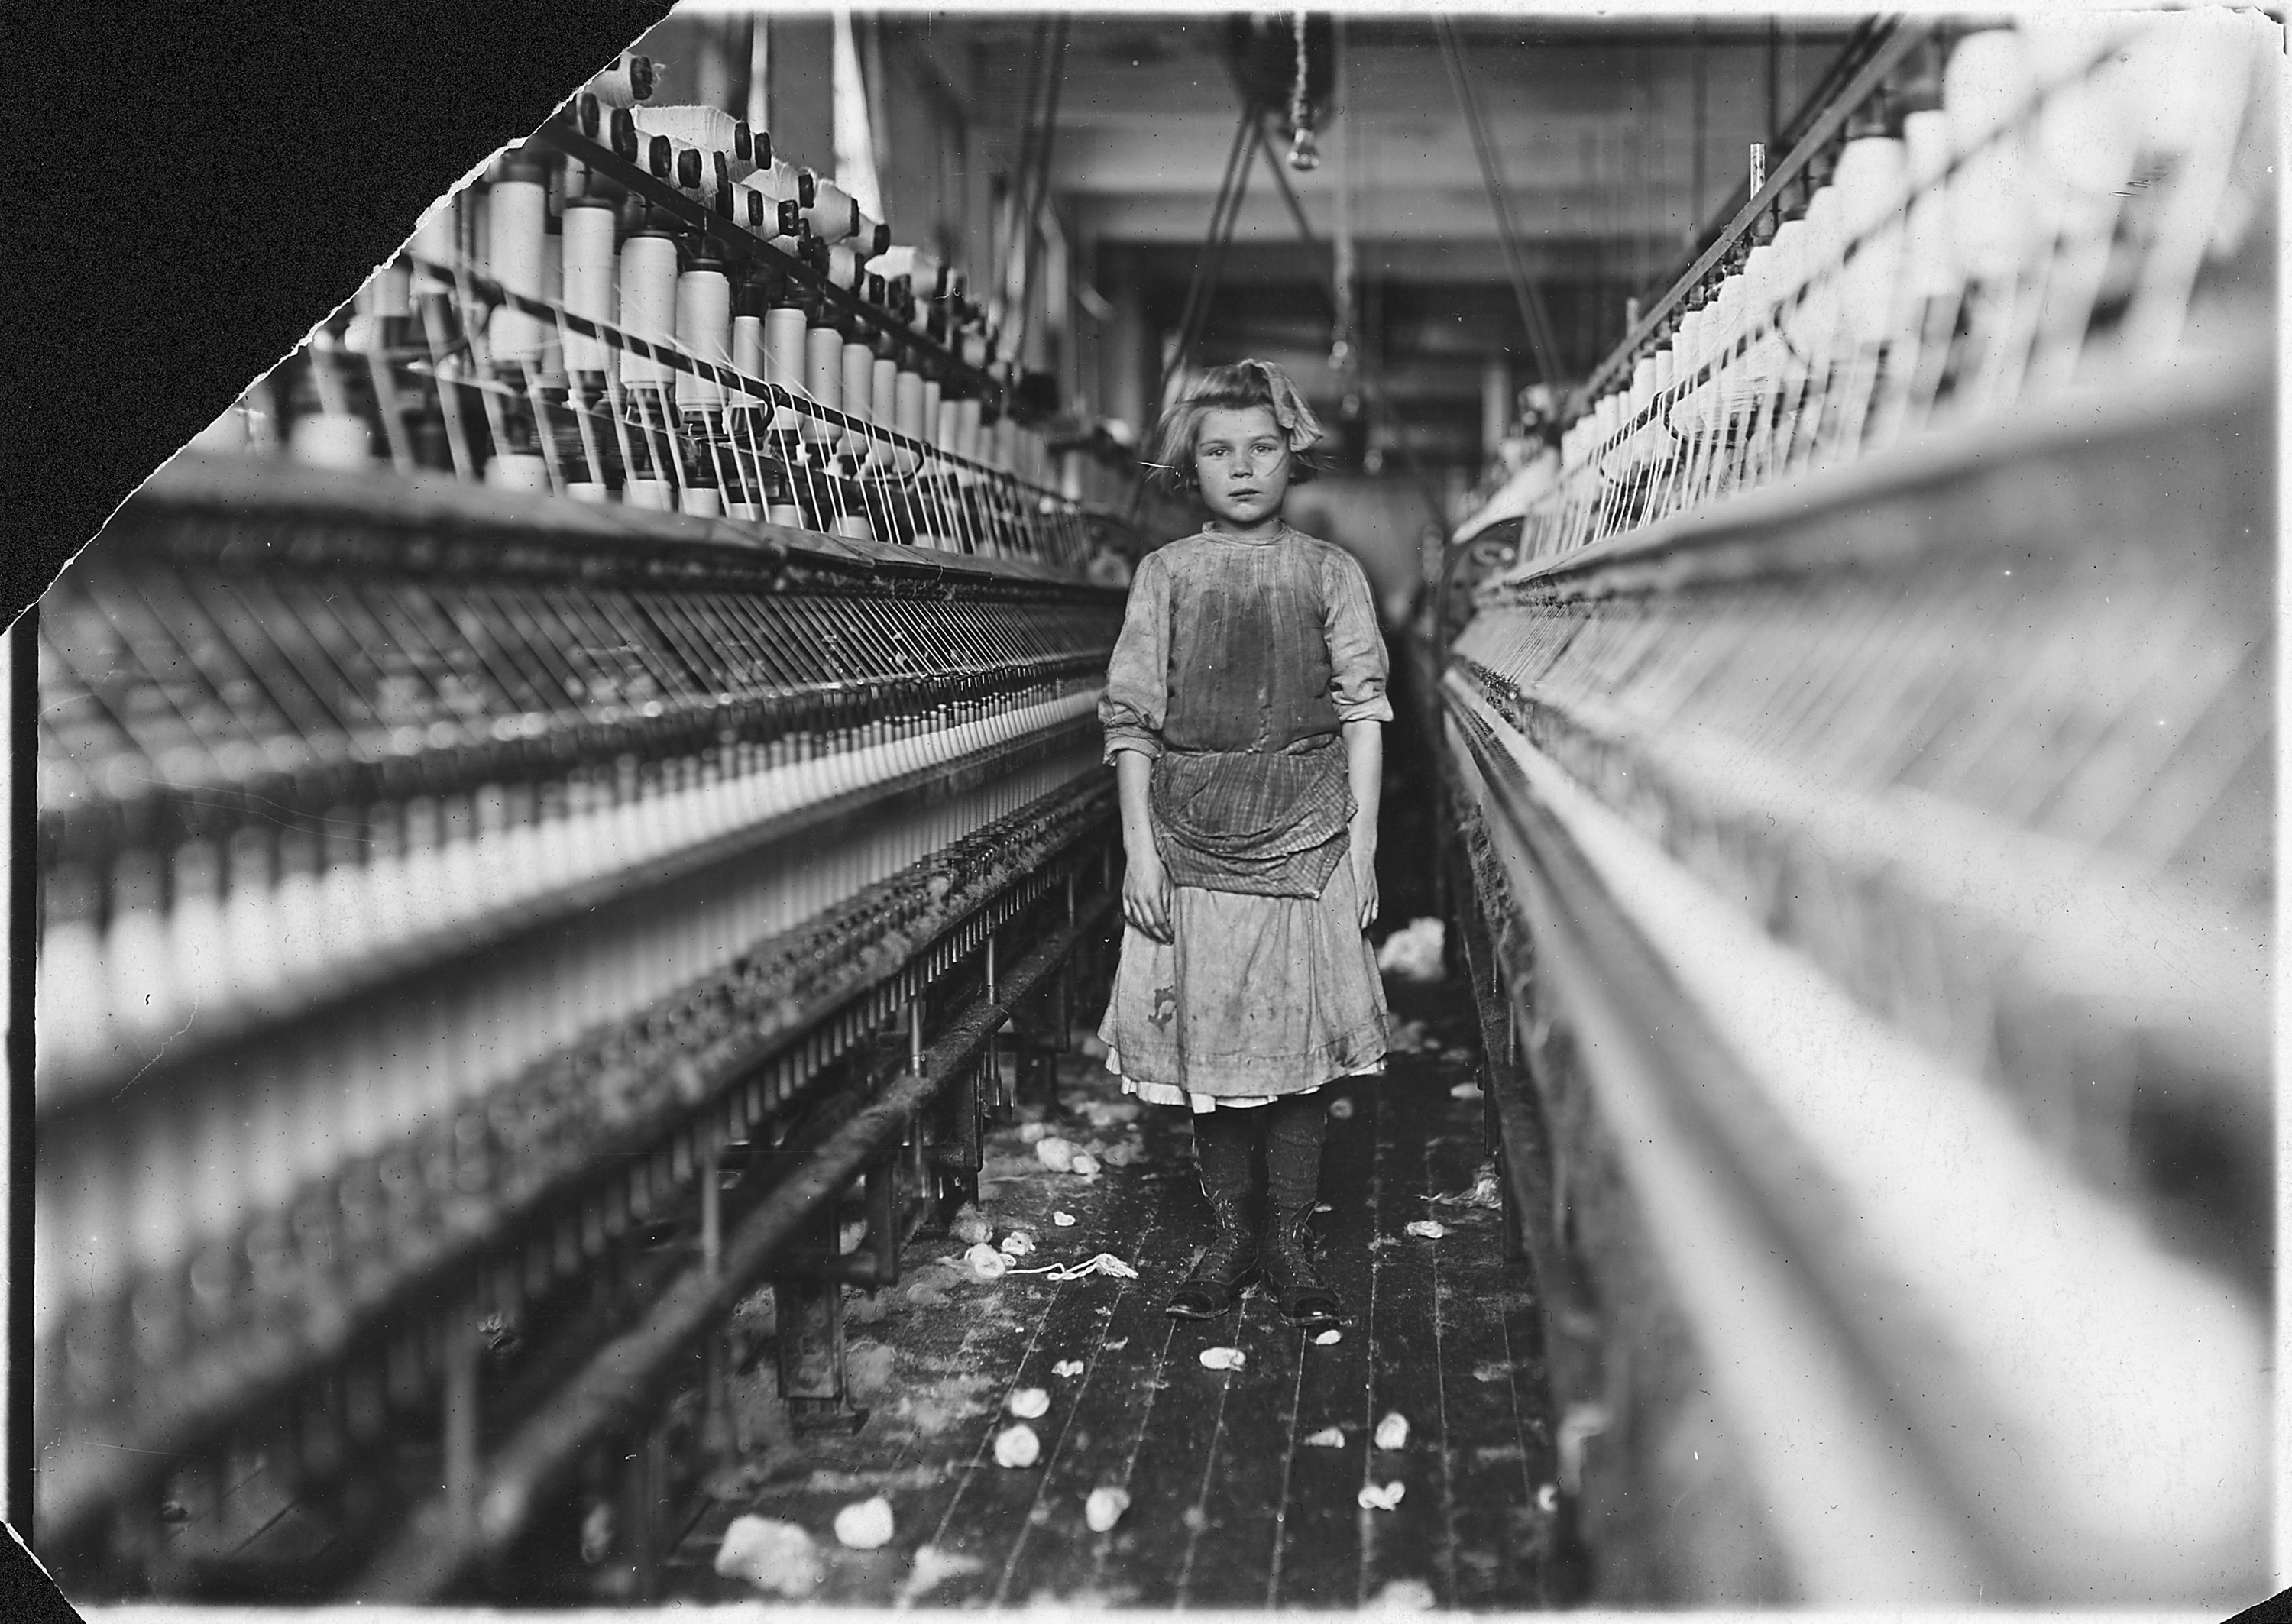 Little spinner in Globe Cotton Mill. Overseer said she was regularly employed there. Augusta, Ga. - NARA - 523158